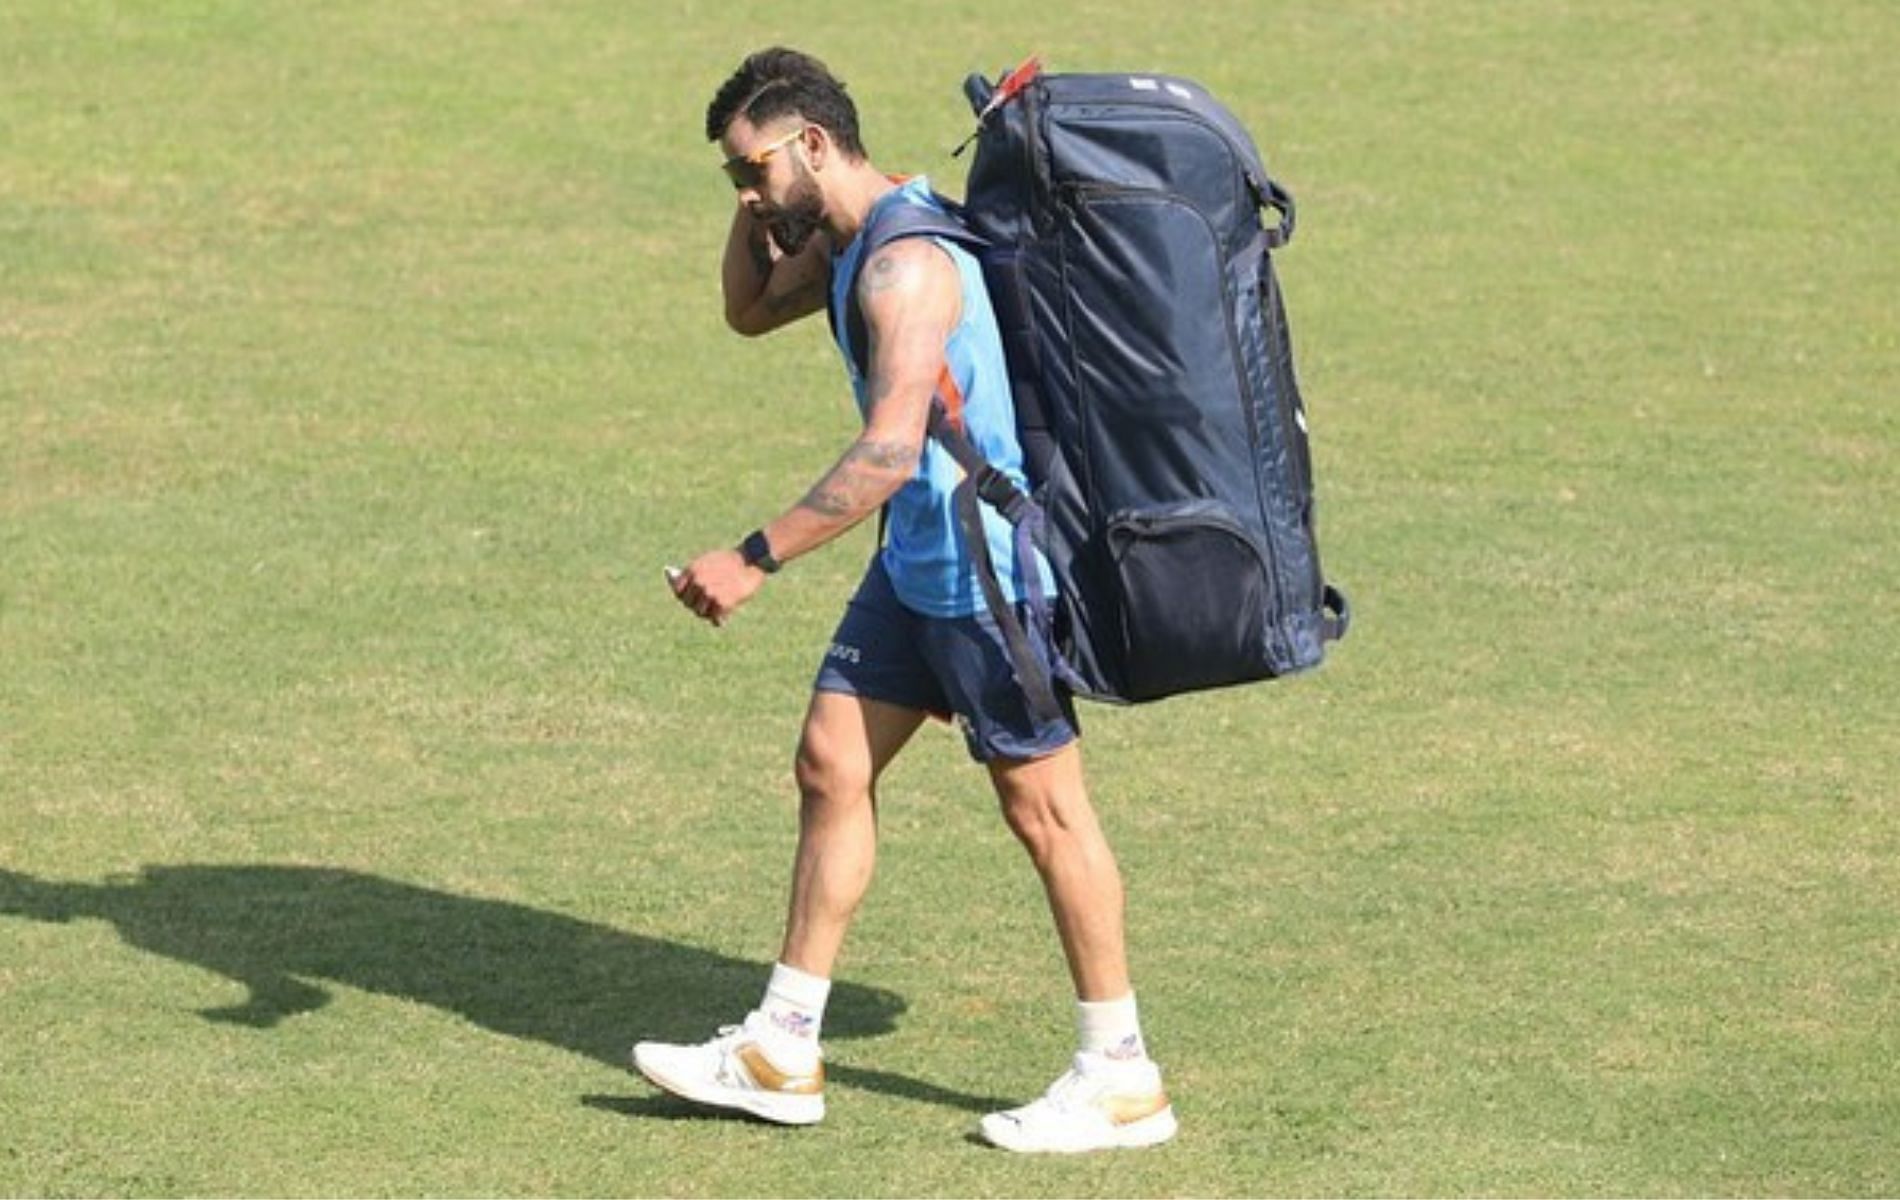 Virat Kohli's main focus today in training camp was preparing for the Pakistani spinners - Reports